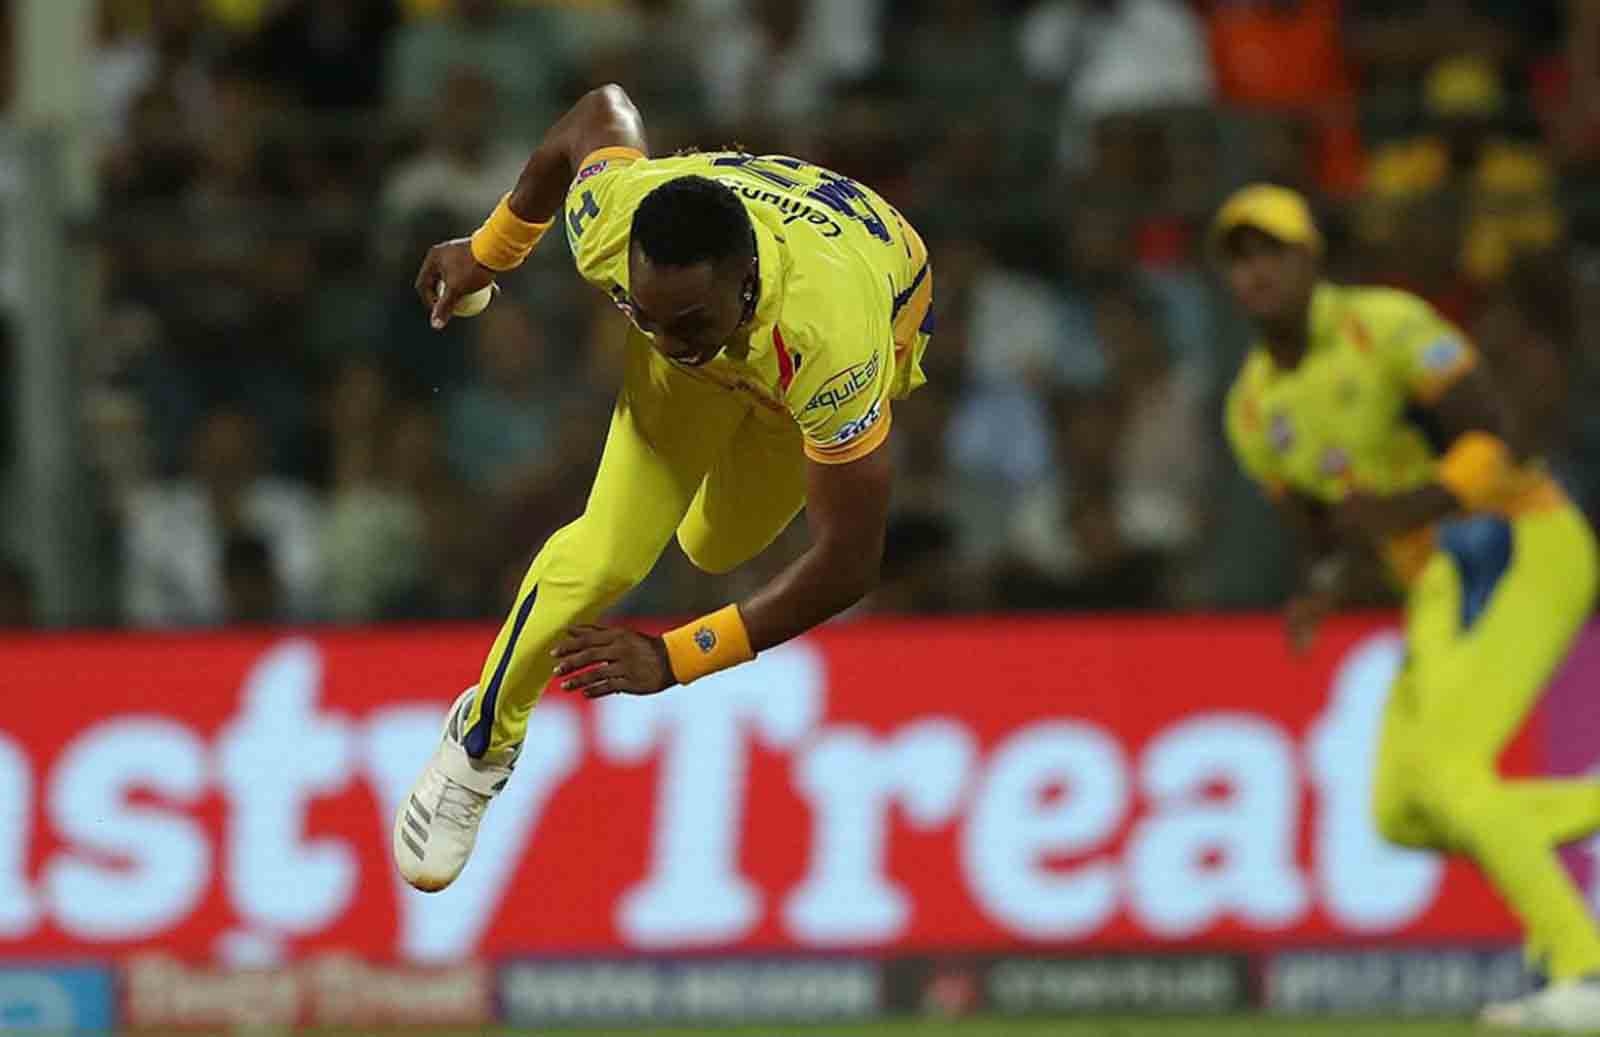 Chennai Super Kings Star All-Rounder Ruled Out of IPL 2020: CSK CEO Gives An Official Update